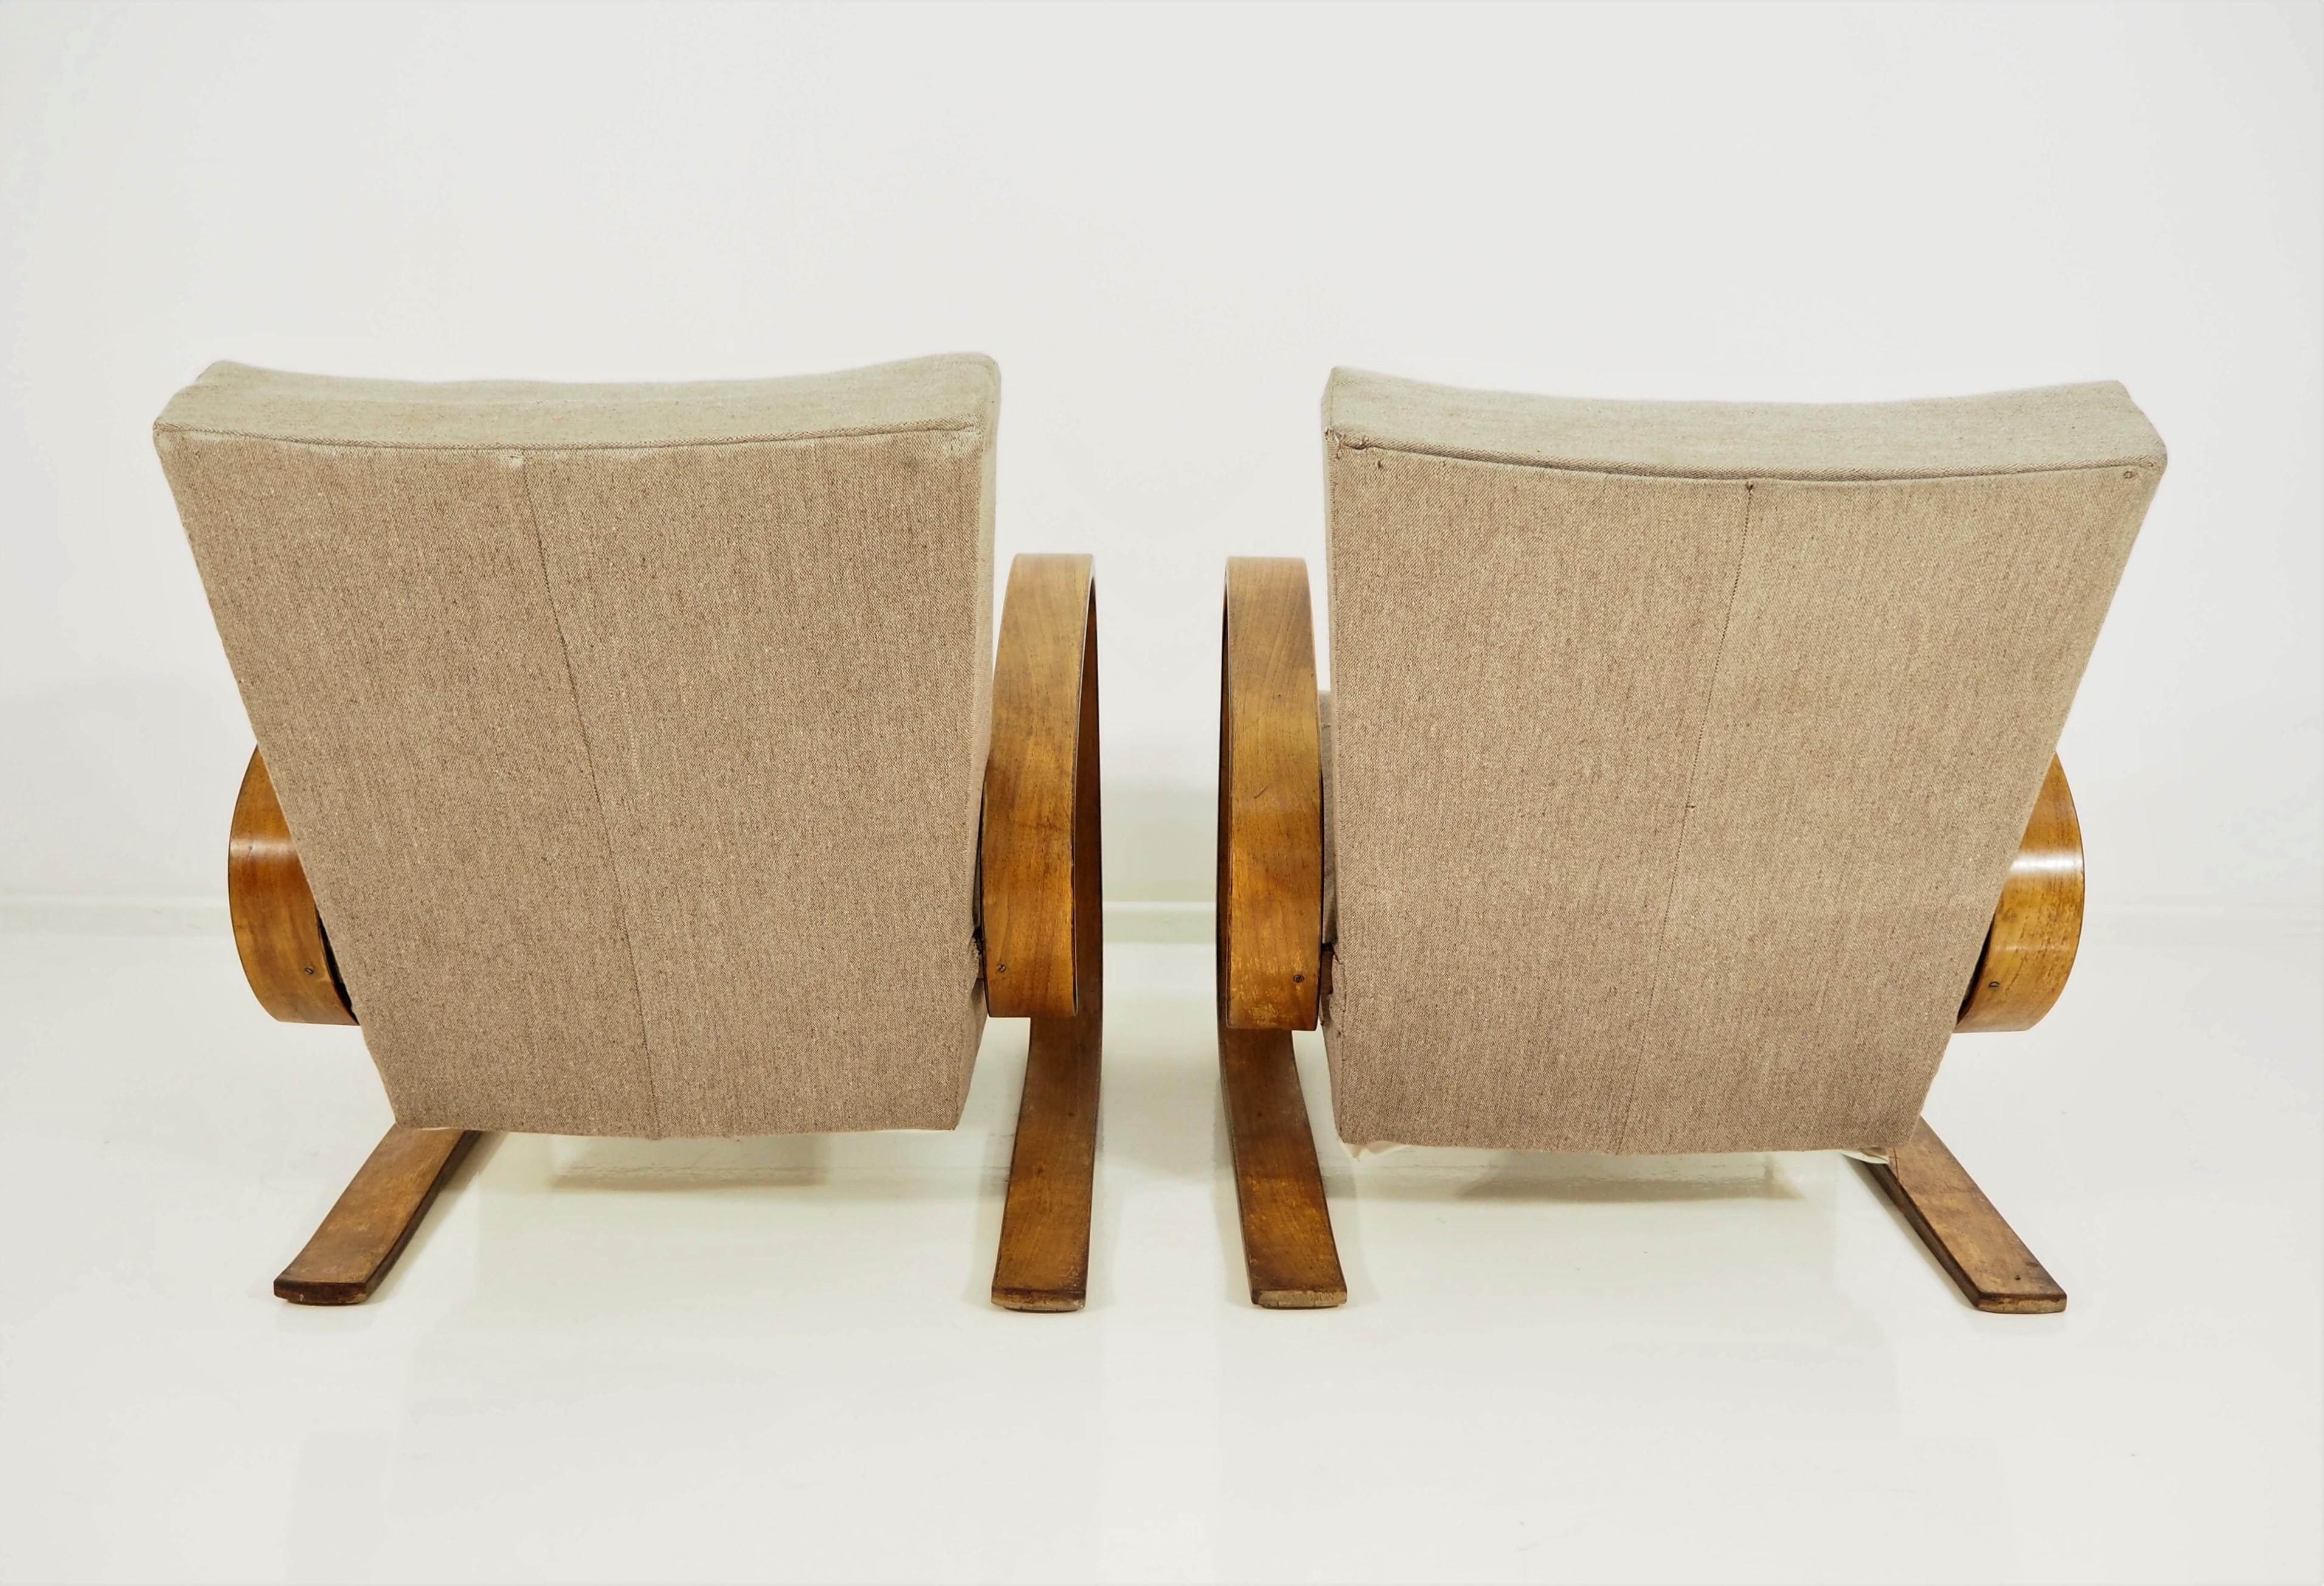 Cantilever armchairs by Miroslav Navratil, 1930s, set of 2 in the style of the 